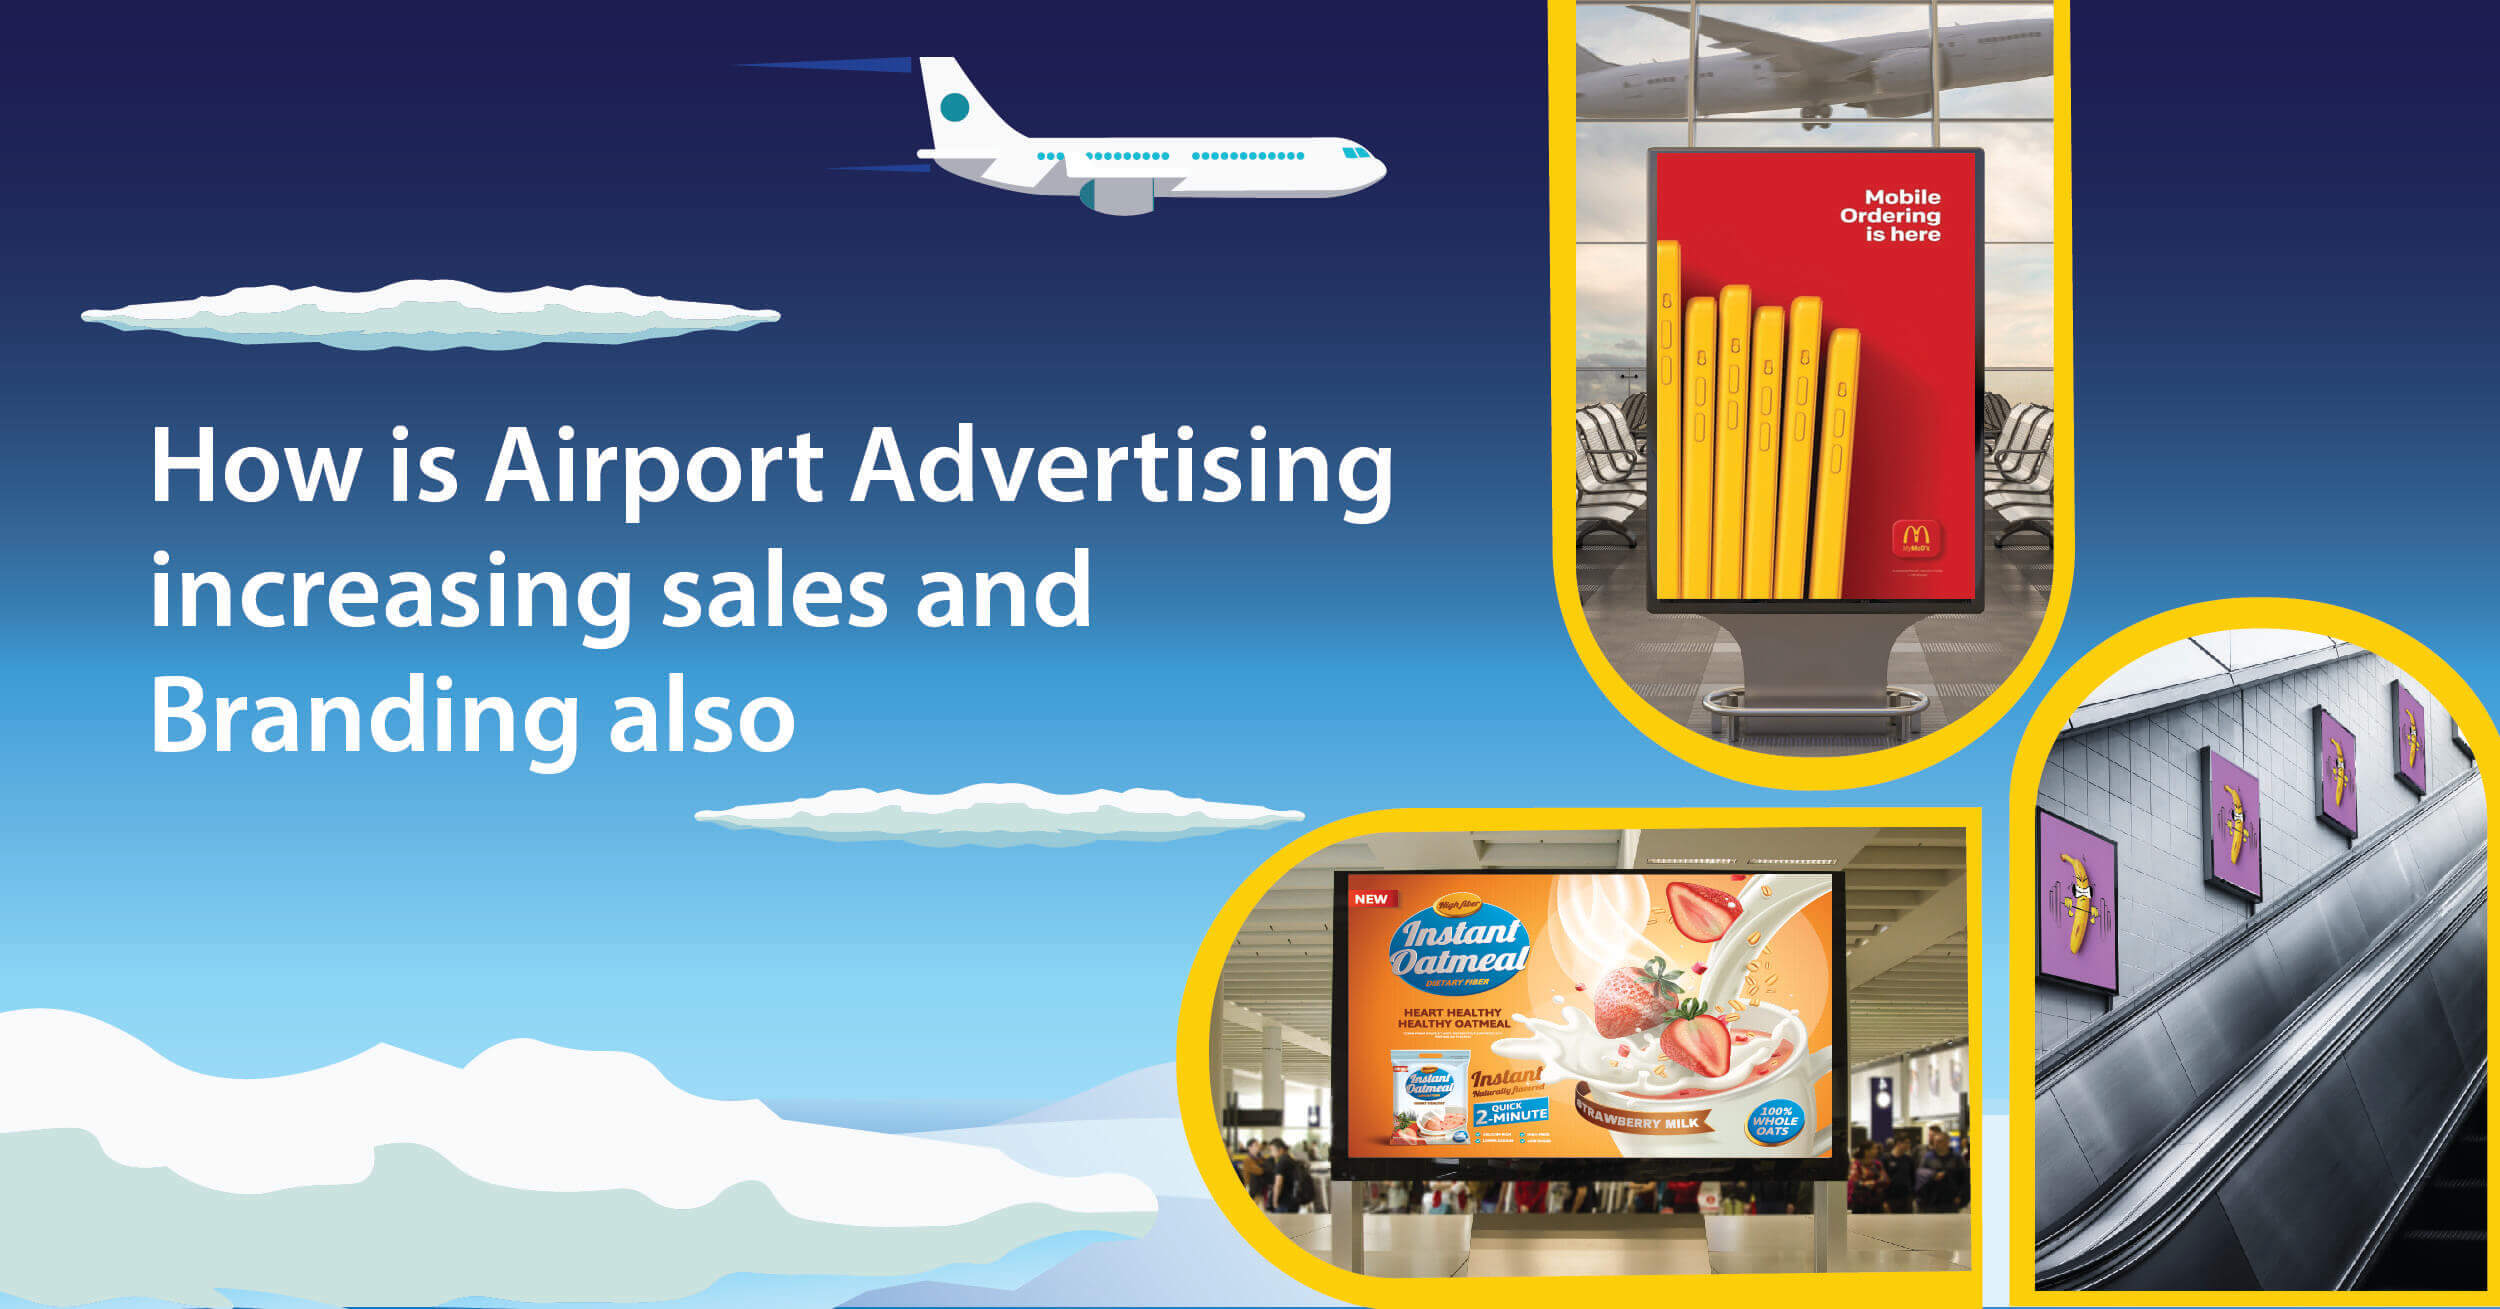 What is Airport Advertising and what are its benefits?